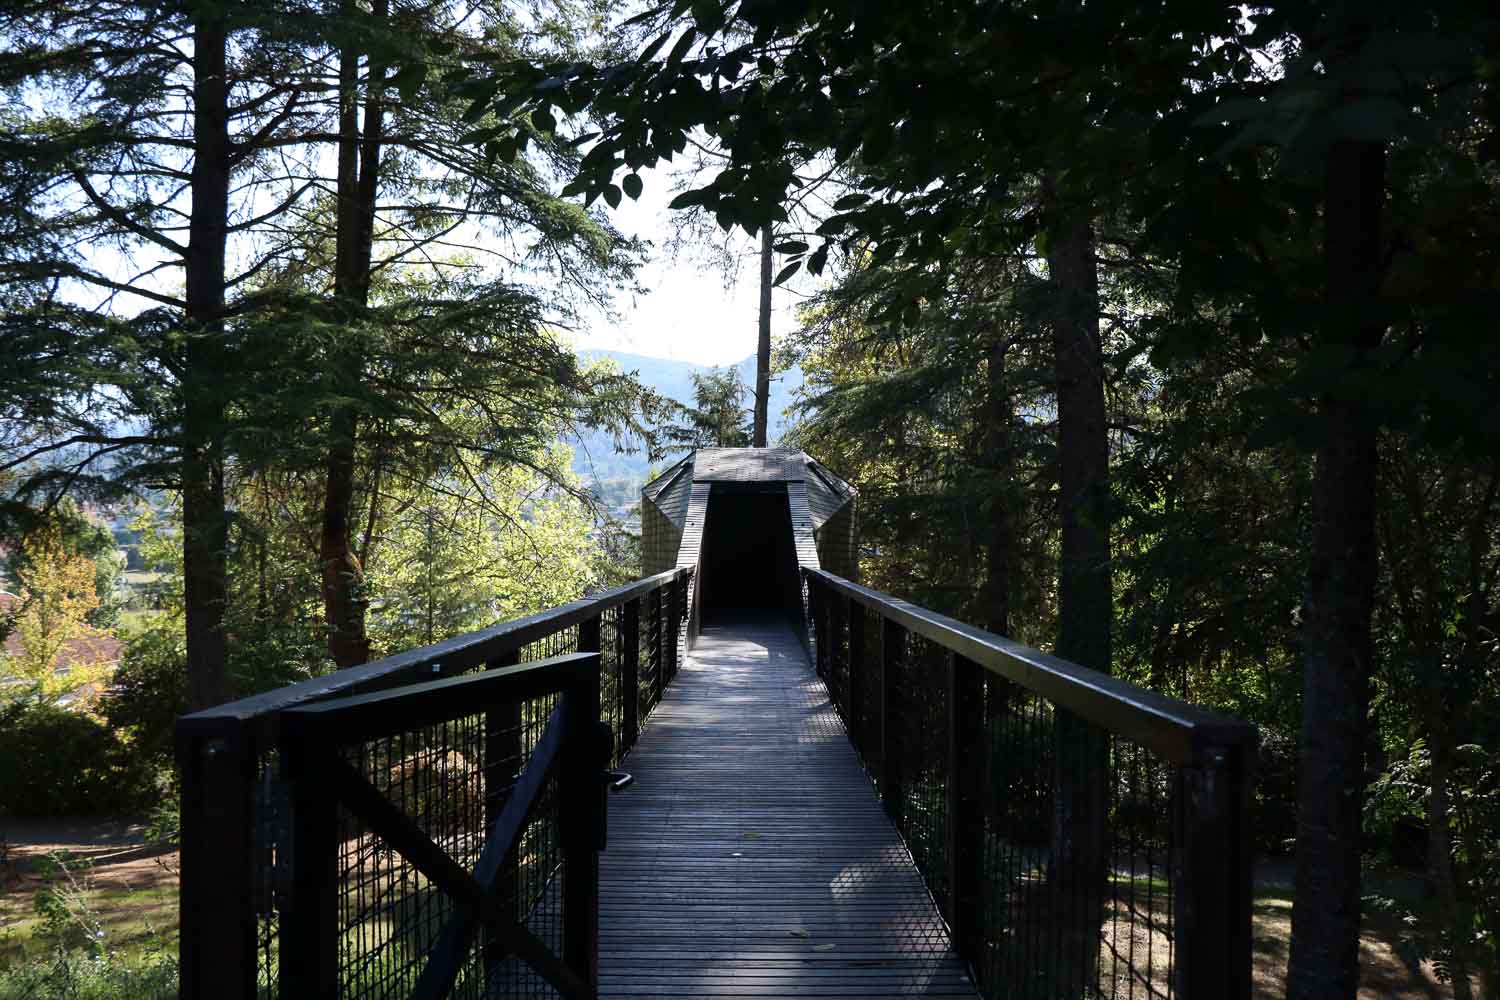 Pedras Salgadas Spa & Nature Park Stepping onto this walkway to our treehouse offered a truly elevated nature experience